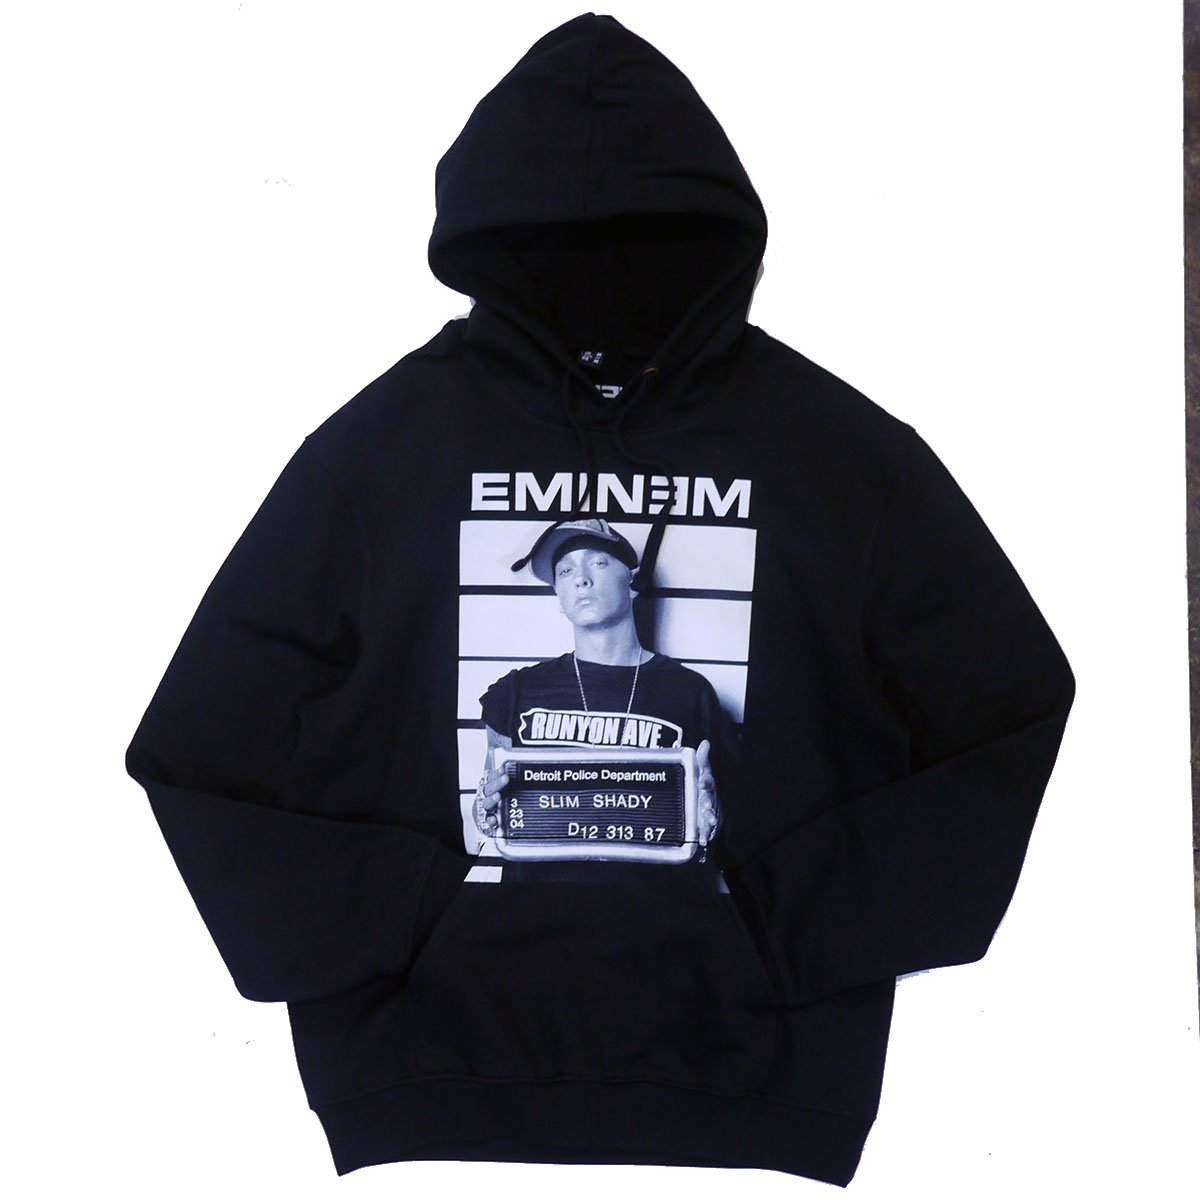 Fedup | HIPHOP WEAR | <img class='new_mark_img1' src='https://img.shop-pro.jp/img/new/icons30.gif' style='border:none;display:inline;margin:0px;padding:0px;width:auto;' />EMINEM 